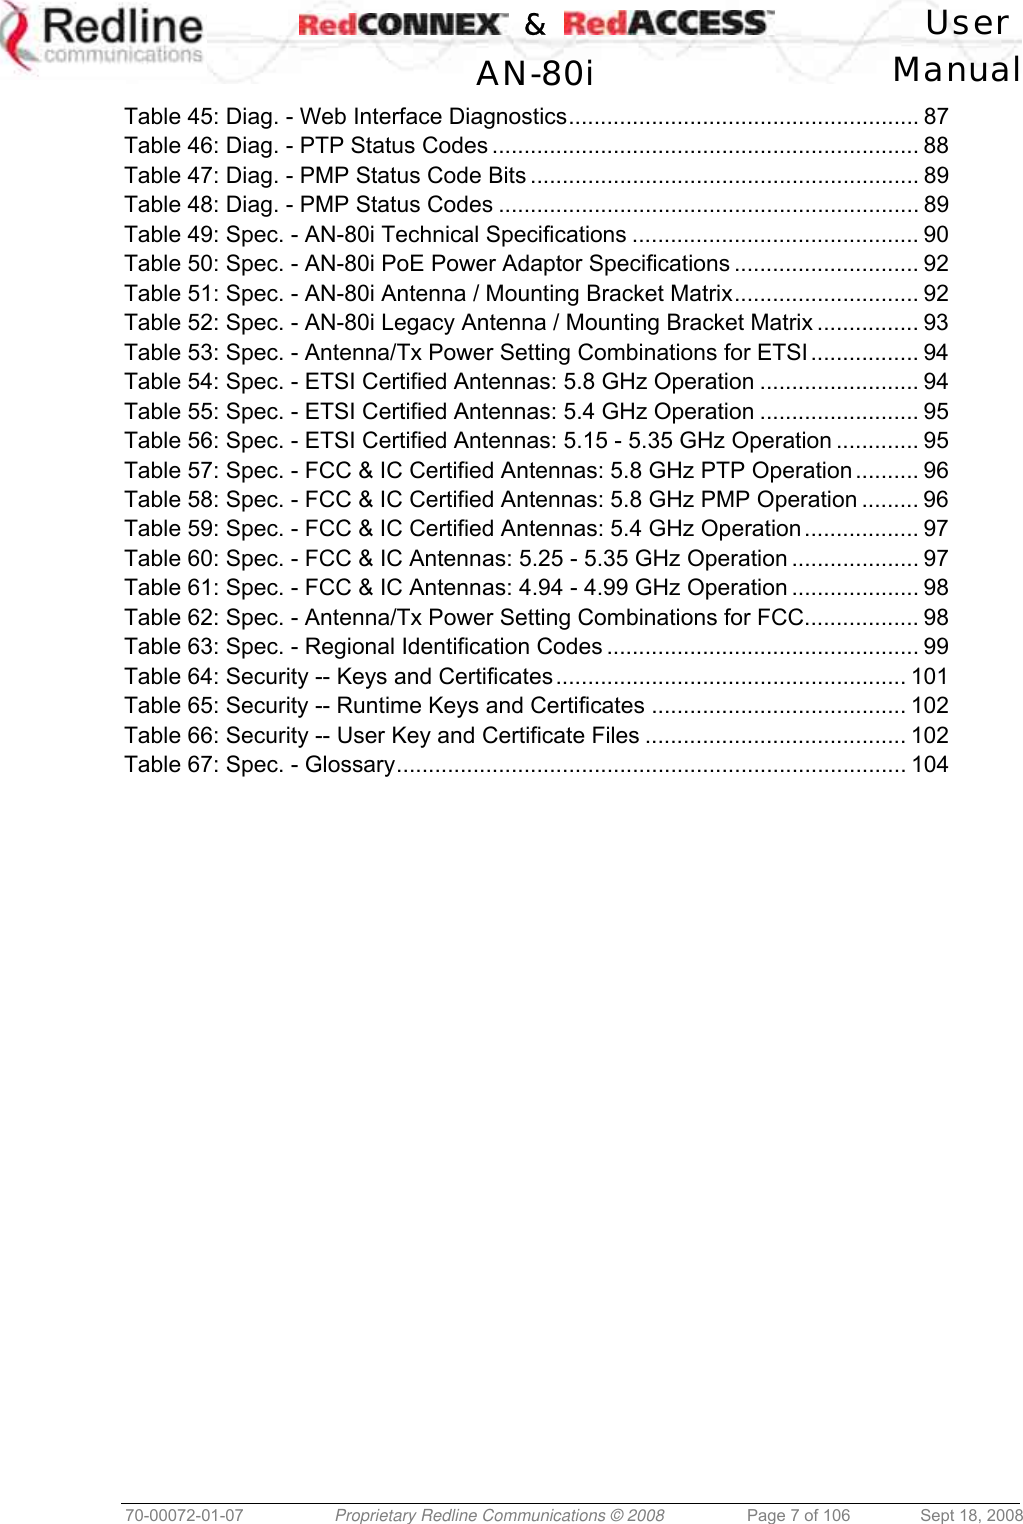    &amp;  User  AN-80i Manual  70-00072-01-07  Proprietary Redline Communications © 2008  Page 7 of 106  Sept 18, 2008 Table 45: Diag. - Web Interface Diagnostics....................................................... 87 Table 46: Diag. - PTP Status Codes ................................................................... 88 Table 47: Diag. - PMP Status Code Bits ............................................................. 89 Table 48: Diag. - PMP Status Codes .................................................................. 89 Table 49: Spec. - AN-80i Technical Specifications ............................................. 90 Table 50: Spec. - AN-80i PoE Power Adaptor Specifications ............................. 92 Table 51: Spec. - AN-80i Antenna / Mounting Bracket Matrix............................. 92 Table 52: Spec. - AN-80i Legacy Antenna / Mounting Bracket Matrix ................ 93 Table 53: Spec. - Antenna/Tx Power Setting Combinations for ETSI................. 94 Table 54: Spec. - ETSI Certified Antennas: 5.8 GHz Operation ......................... 94 Table 55: Spec. - ETSI Certified Antennas: 5.4 GHz Operation ......................... 95 Table 56: Spec. - ETSI Certified Antennas: 5.15 - 5.35 GHz Operation ............. 95 Table 57: Spec. - FCC &amp; IC Certified Antennas: 5.8 GHz PTP Operation .......... 96 Table 58: Spec. - FCC &amp; IC Certified Antennas: 5.8 GHz PMP Operation ......... 96 Table 59: Spec. - FCC &amp; IC Certified Antennas: 5.4 GHz Operation.................. 97 Table 60: Spec. - FCC &amp; IC Antennas: 5.25 - 5.35 GHz Operation .................... 97 Table 61: Spec. - FCC &amp; IC Antennas: 4.94 - 4.99 GHz Operation .................... 98 Table 62: Spec. - Antenna/Tx Power Setting Combinations for FCC.................. 98 Table 63: Spec. - Regional Identification Codes ................................................. 99 Table 64: Security -- Keys and Certificates....................................................... 101 Table 65: Security -- Runtime Keys and Certificates ........................................ 102 Table 66: Security -- User Key and Certificate Files ......................................... 102 Table 67: Spec. - Glossary................................................................................ 104   